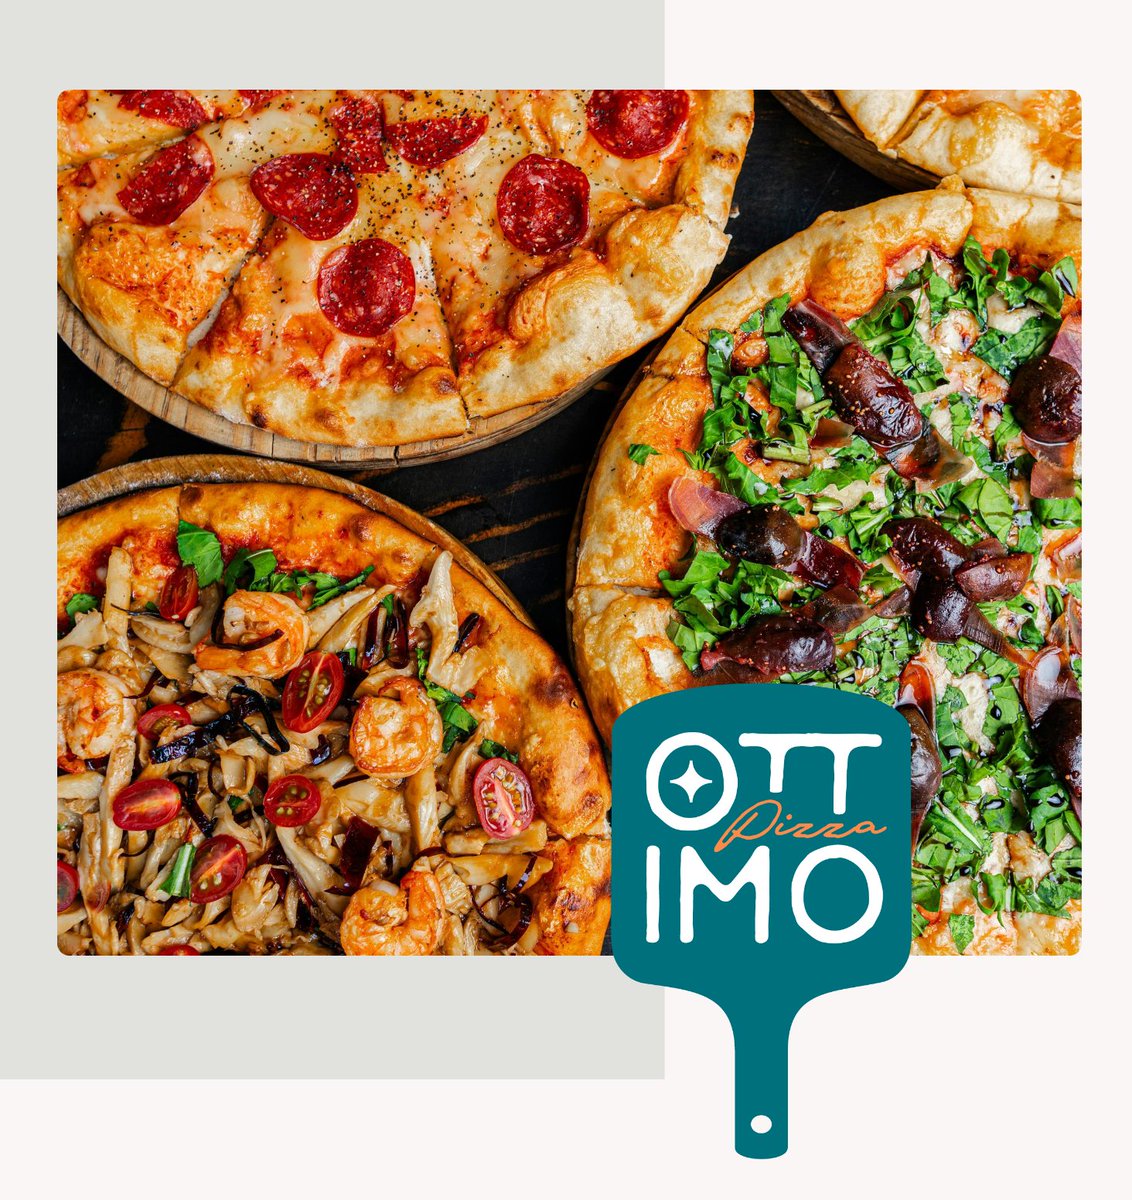 New to Oakwood, Leeds, is Ottimo, where we treat pizza with passion. A passion for great dough, topped with well sourced ingredients and a focus on balanced flavours. Find out more at: bit.ly/4aIc3tA #JLife #Magazine #Leeds #Jewishlife #Pizza #PizzaRestaurant #Le ...